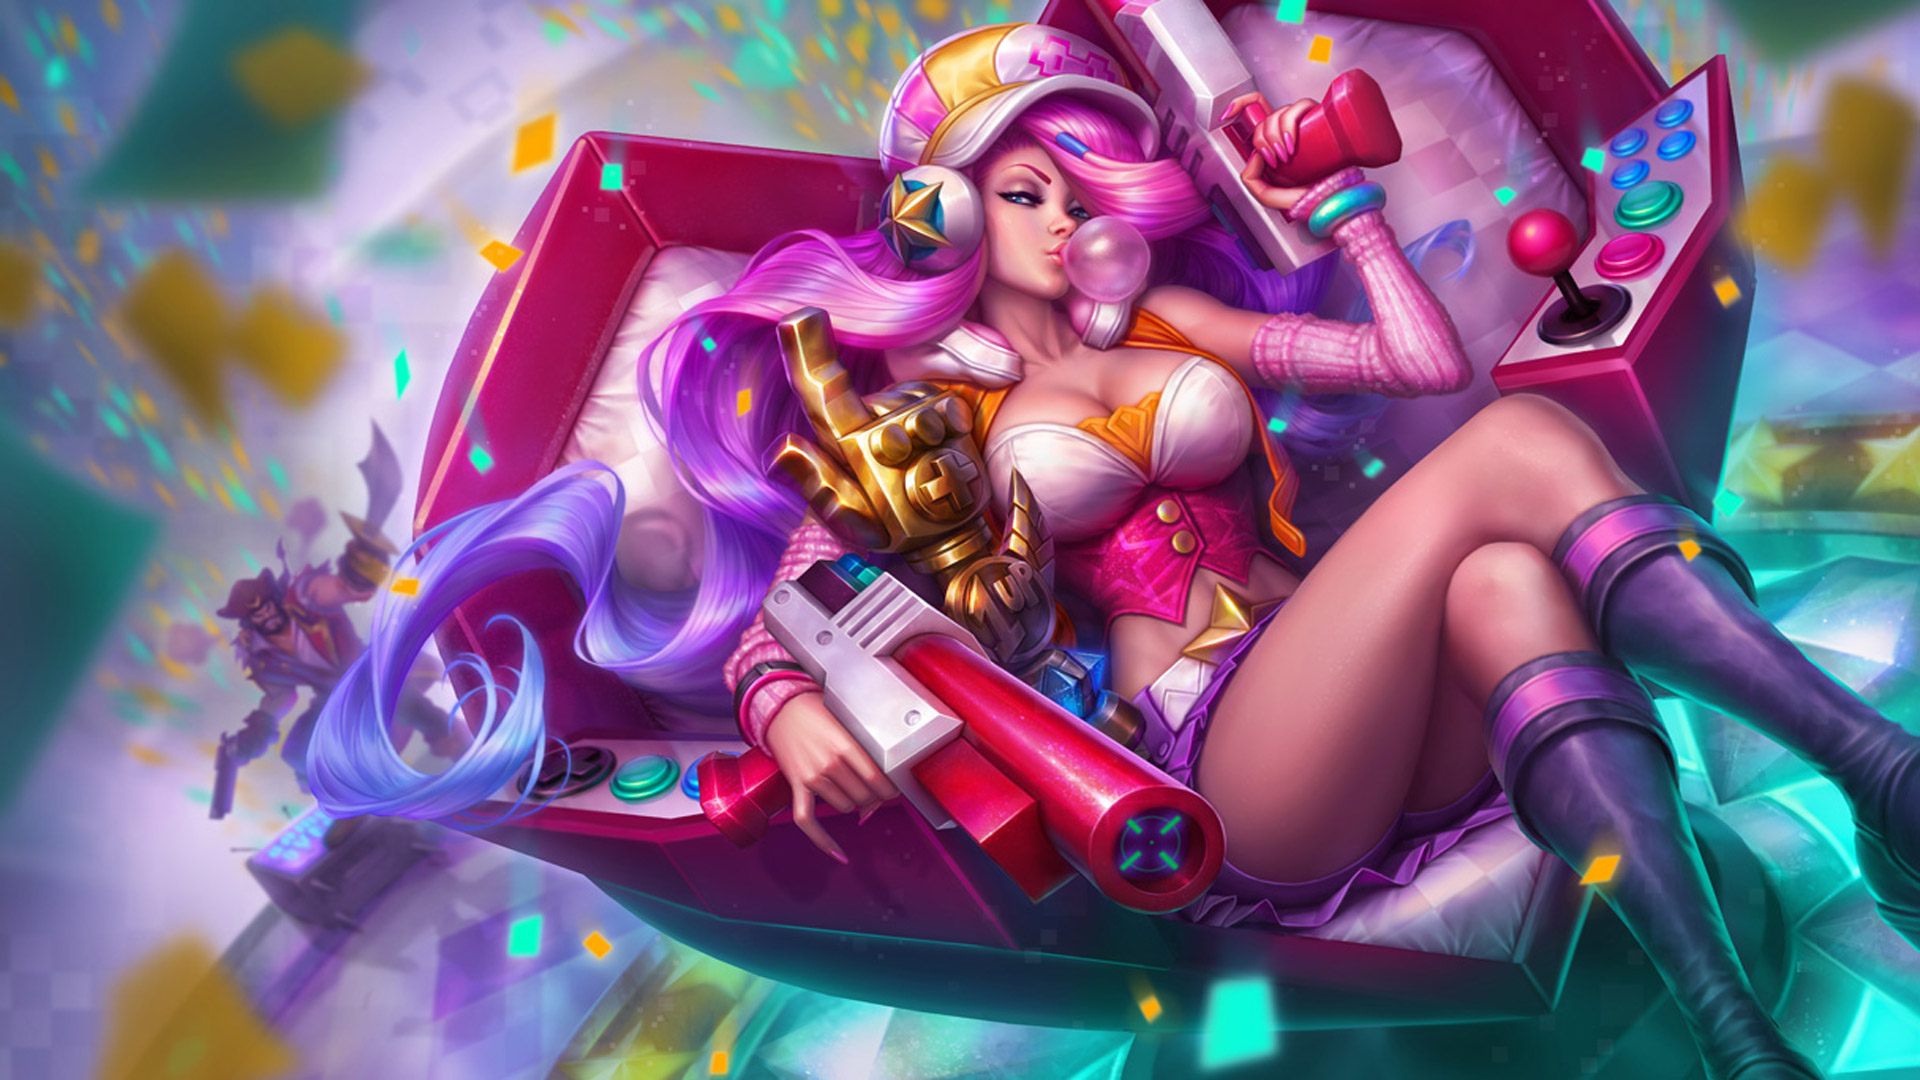 Free Wallpapers   LoL Arcade Miss Fortune 2014 wallpaper